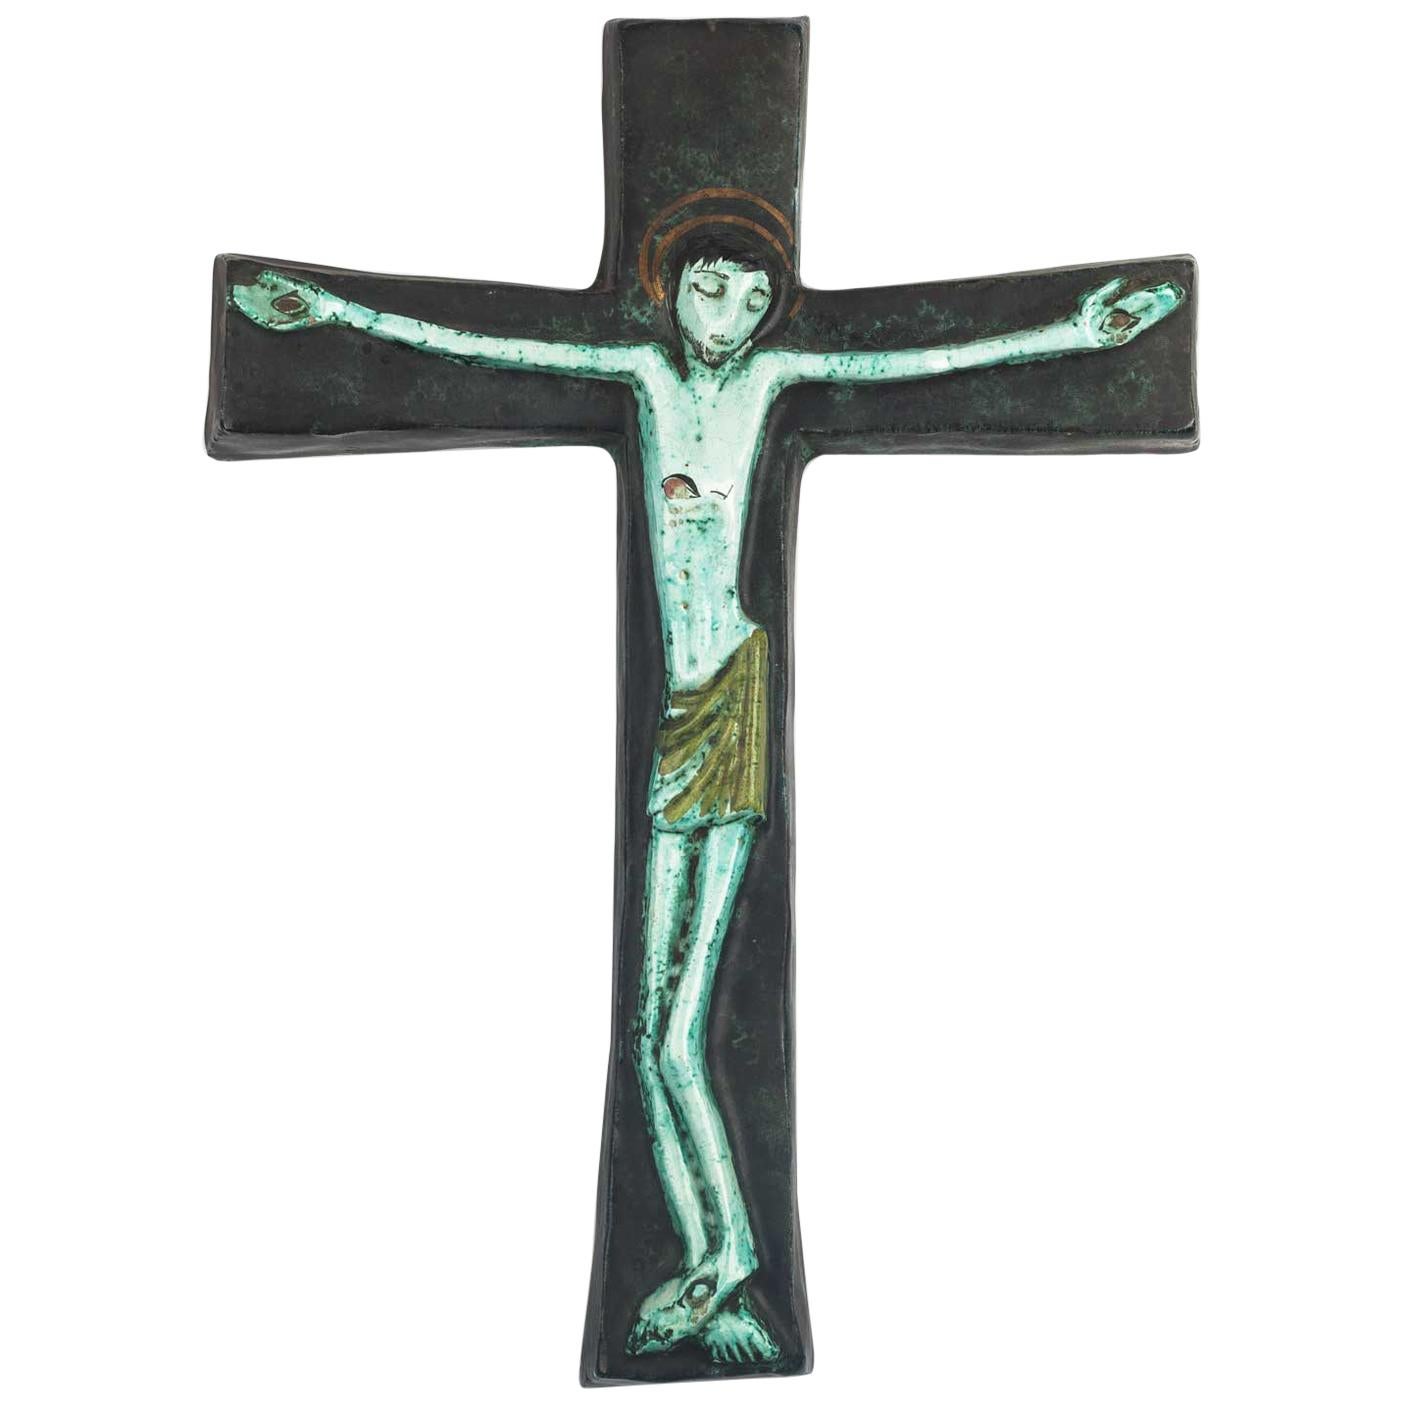 Midcentury European Wall Cross, Hand Painted Textured Ceramic, 1970s For Sale